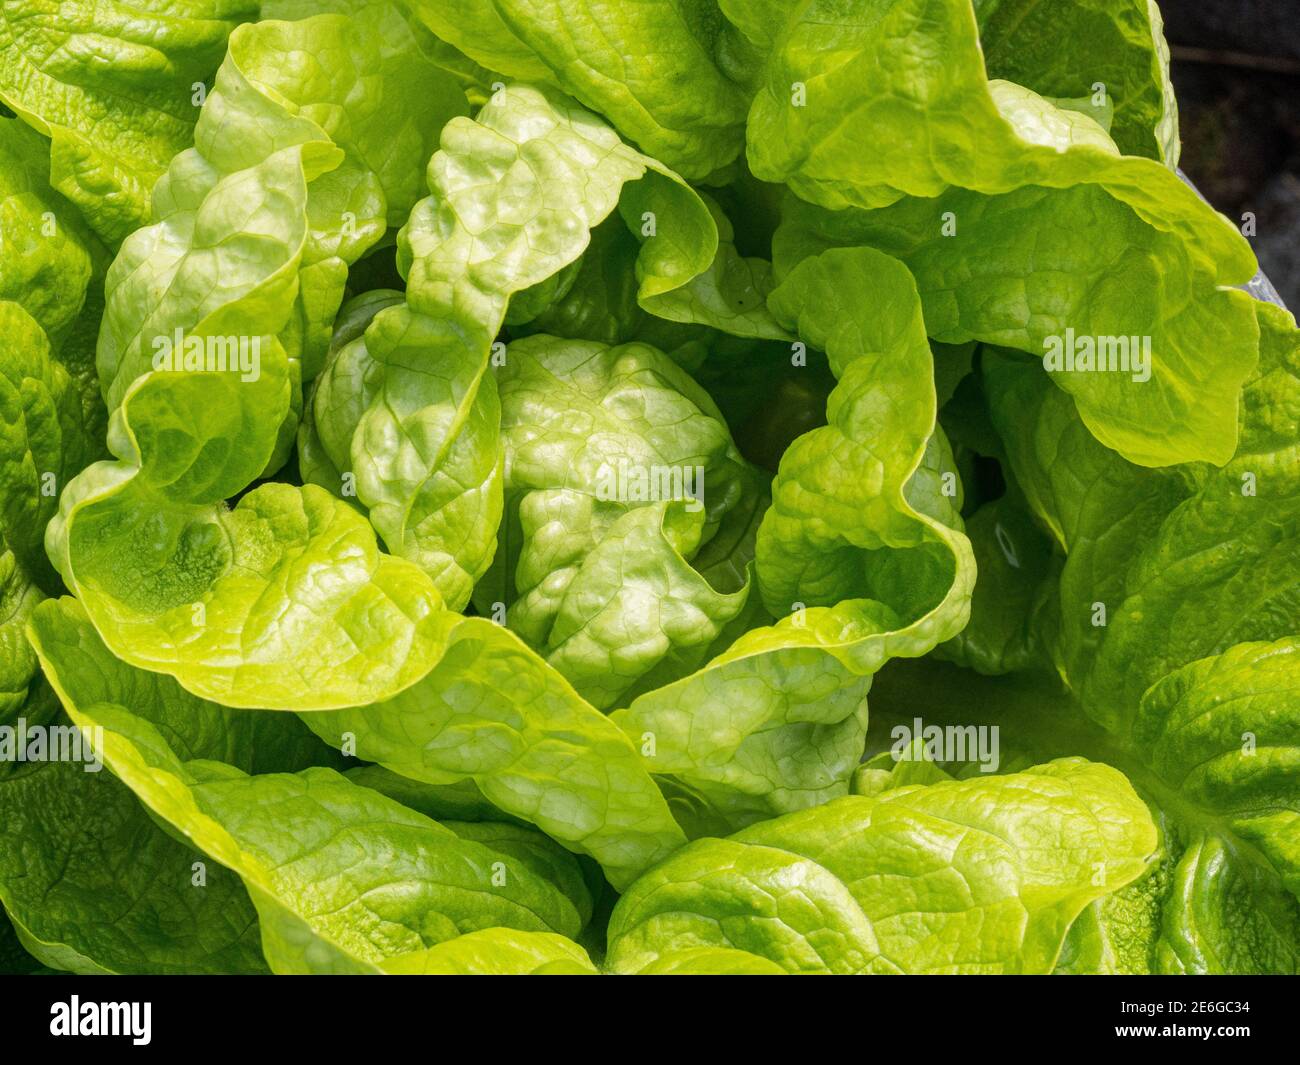 A close up the a fully grown plant of the winter lettuce Winter Density Stock Photo